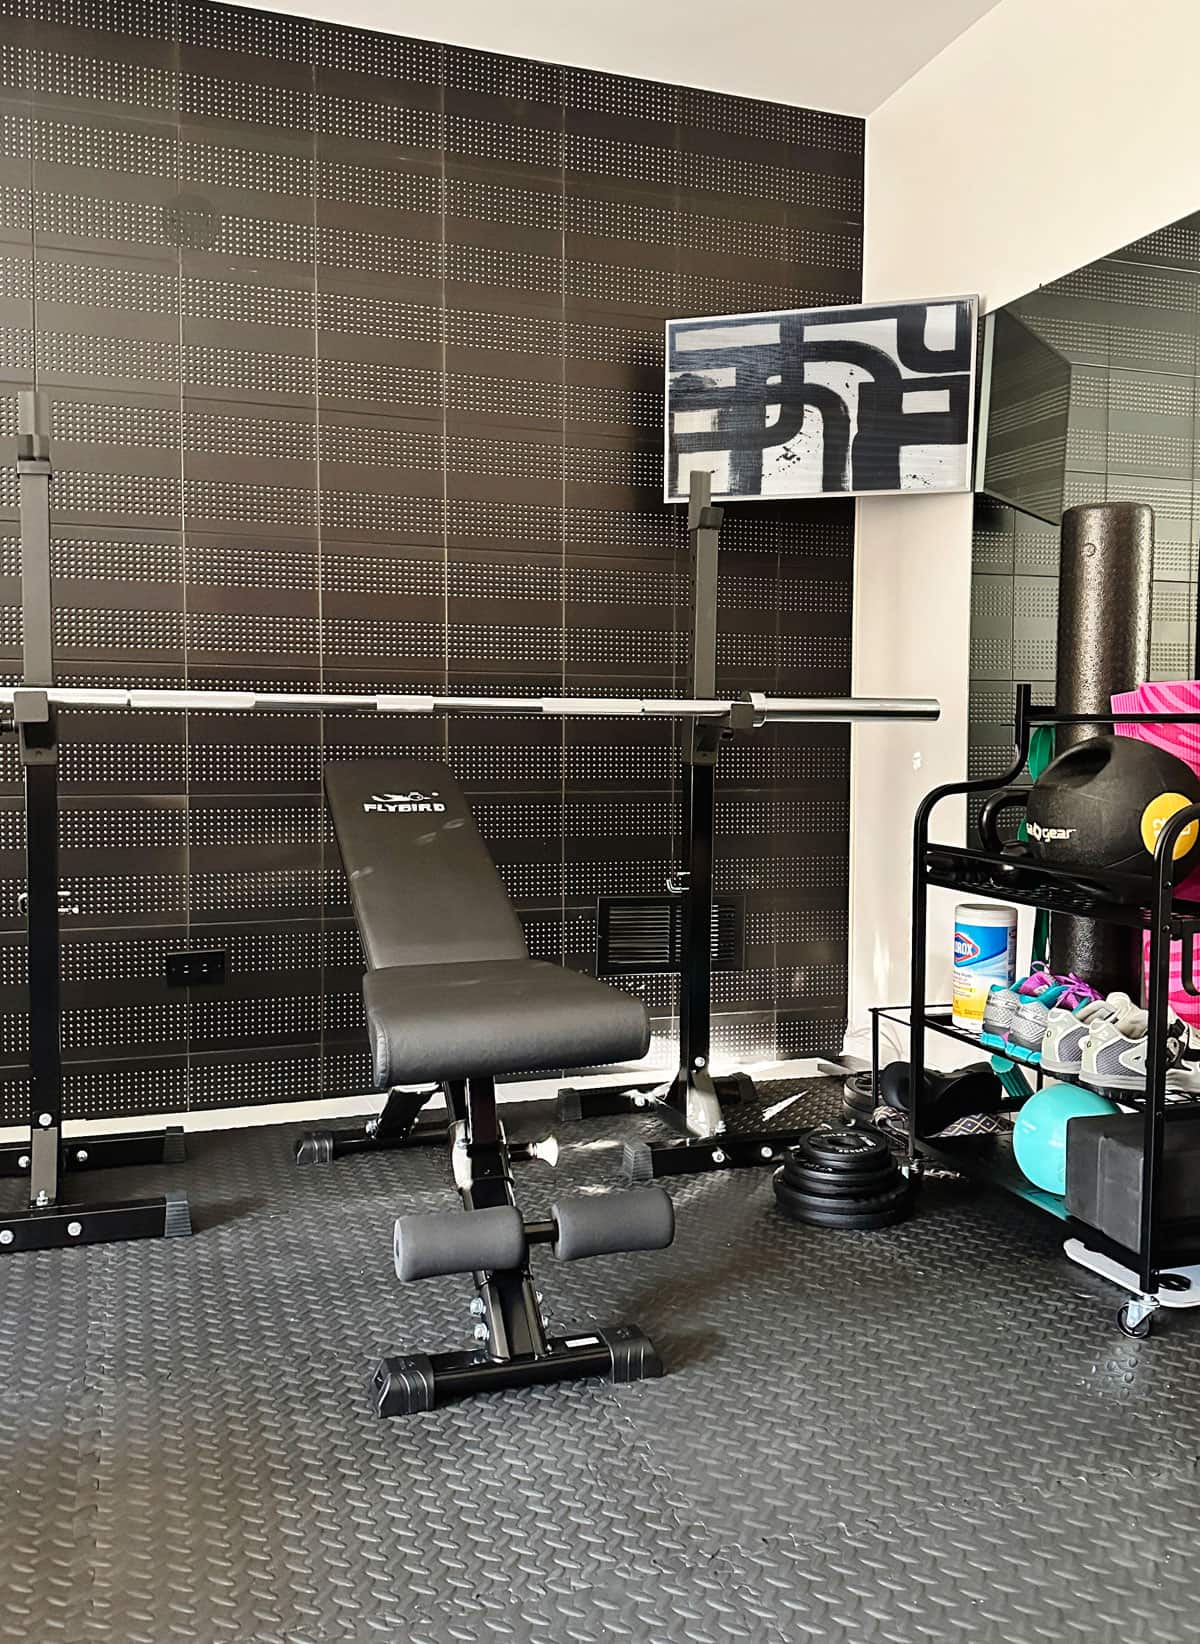 Mini Home Gym - Compact Ideas and Equipment - Small home gym room ideas with small space compact equipment. This weight bench folds up for easy small space storage.